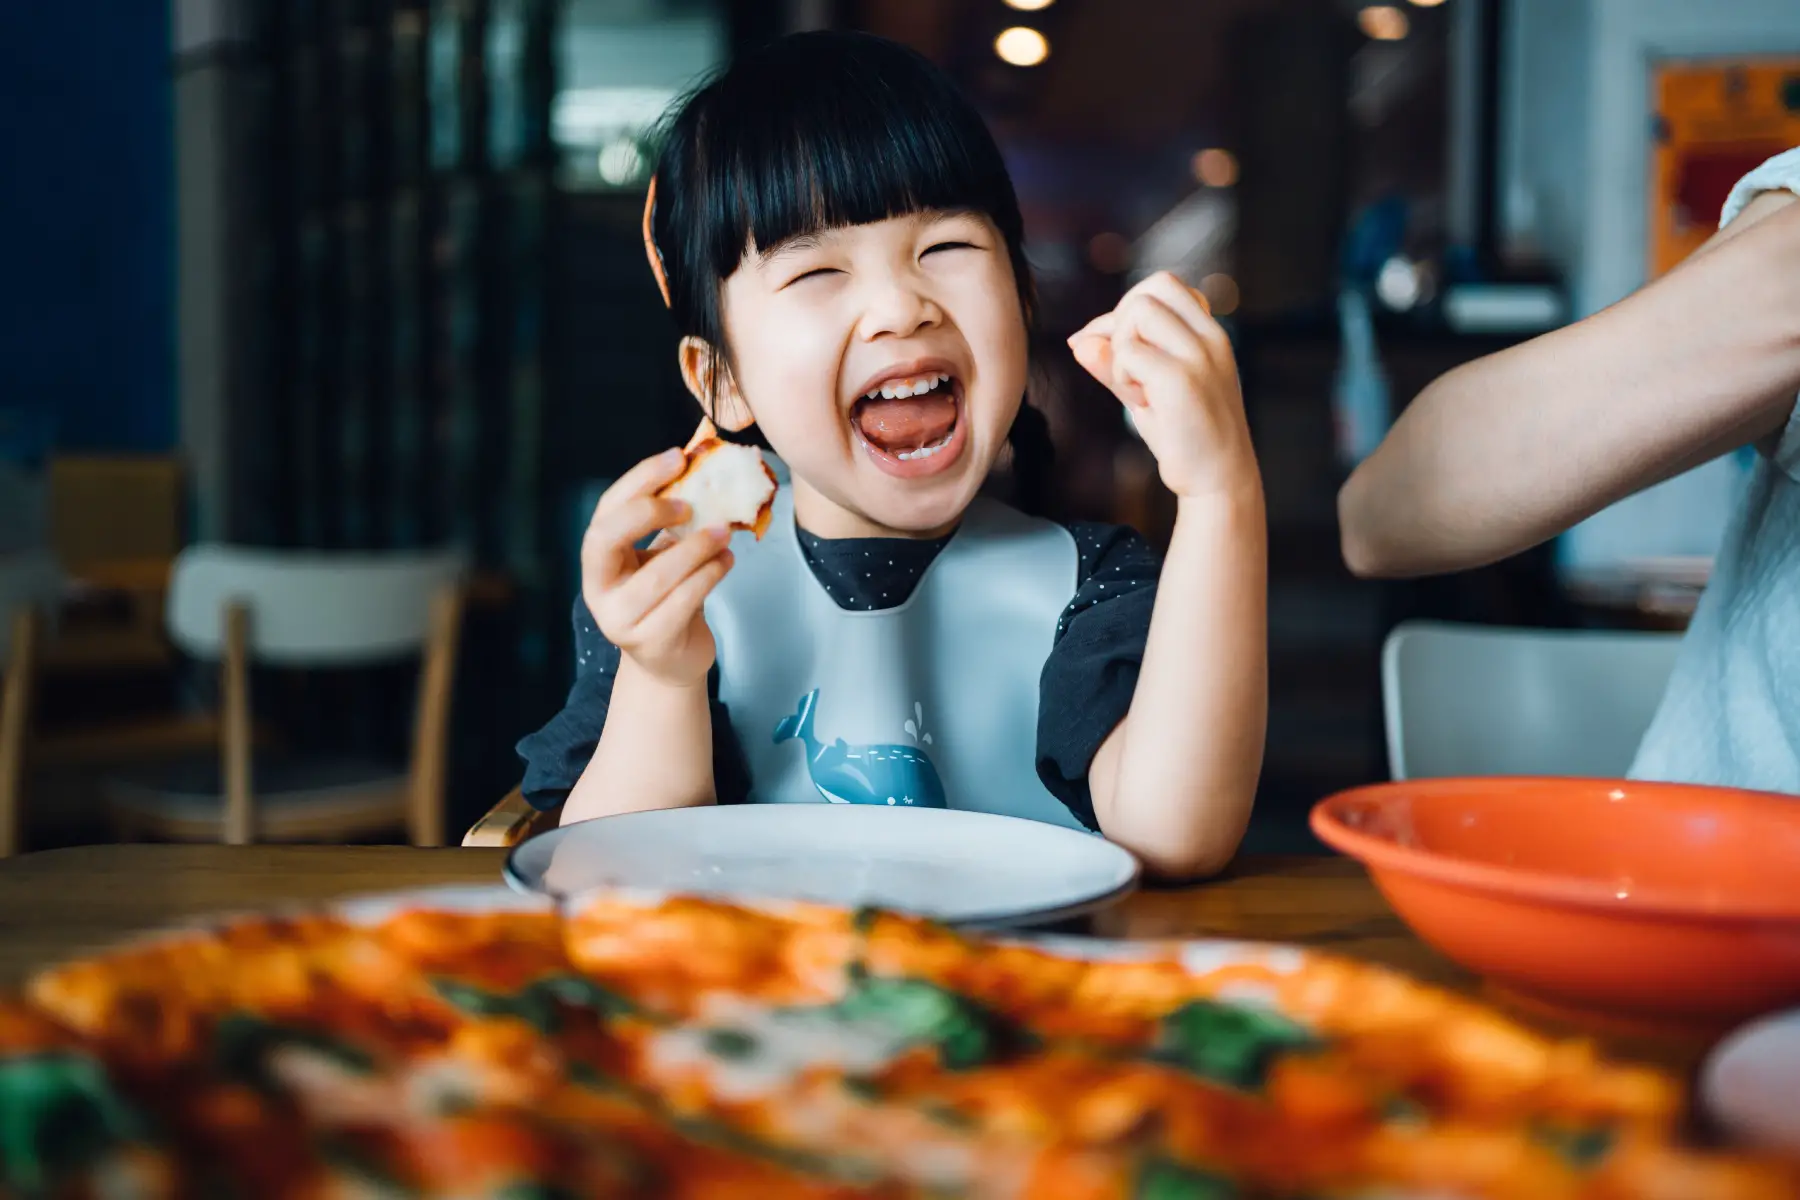 Girl laughing and eating pizza at restaurant